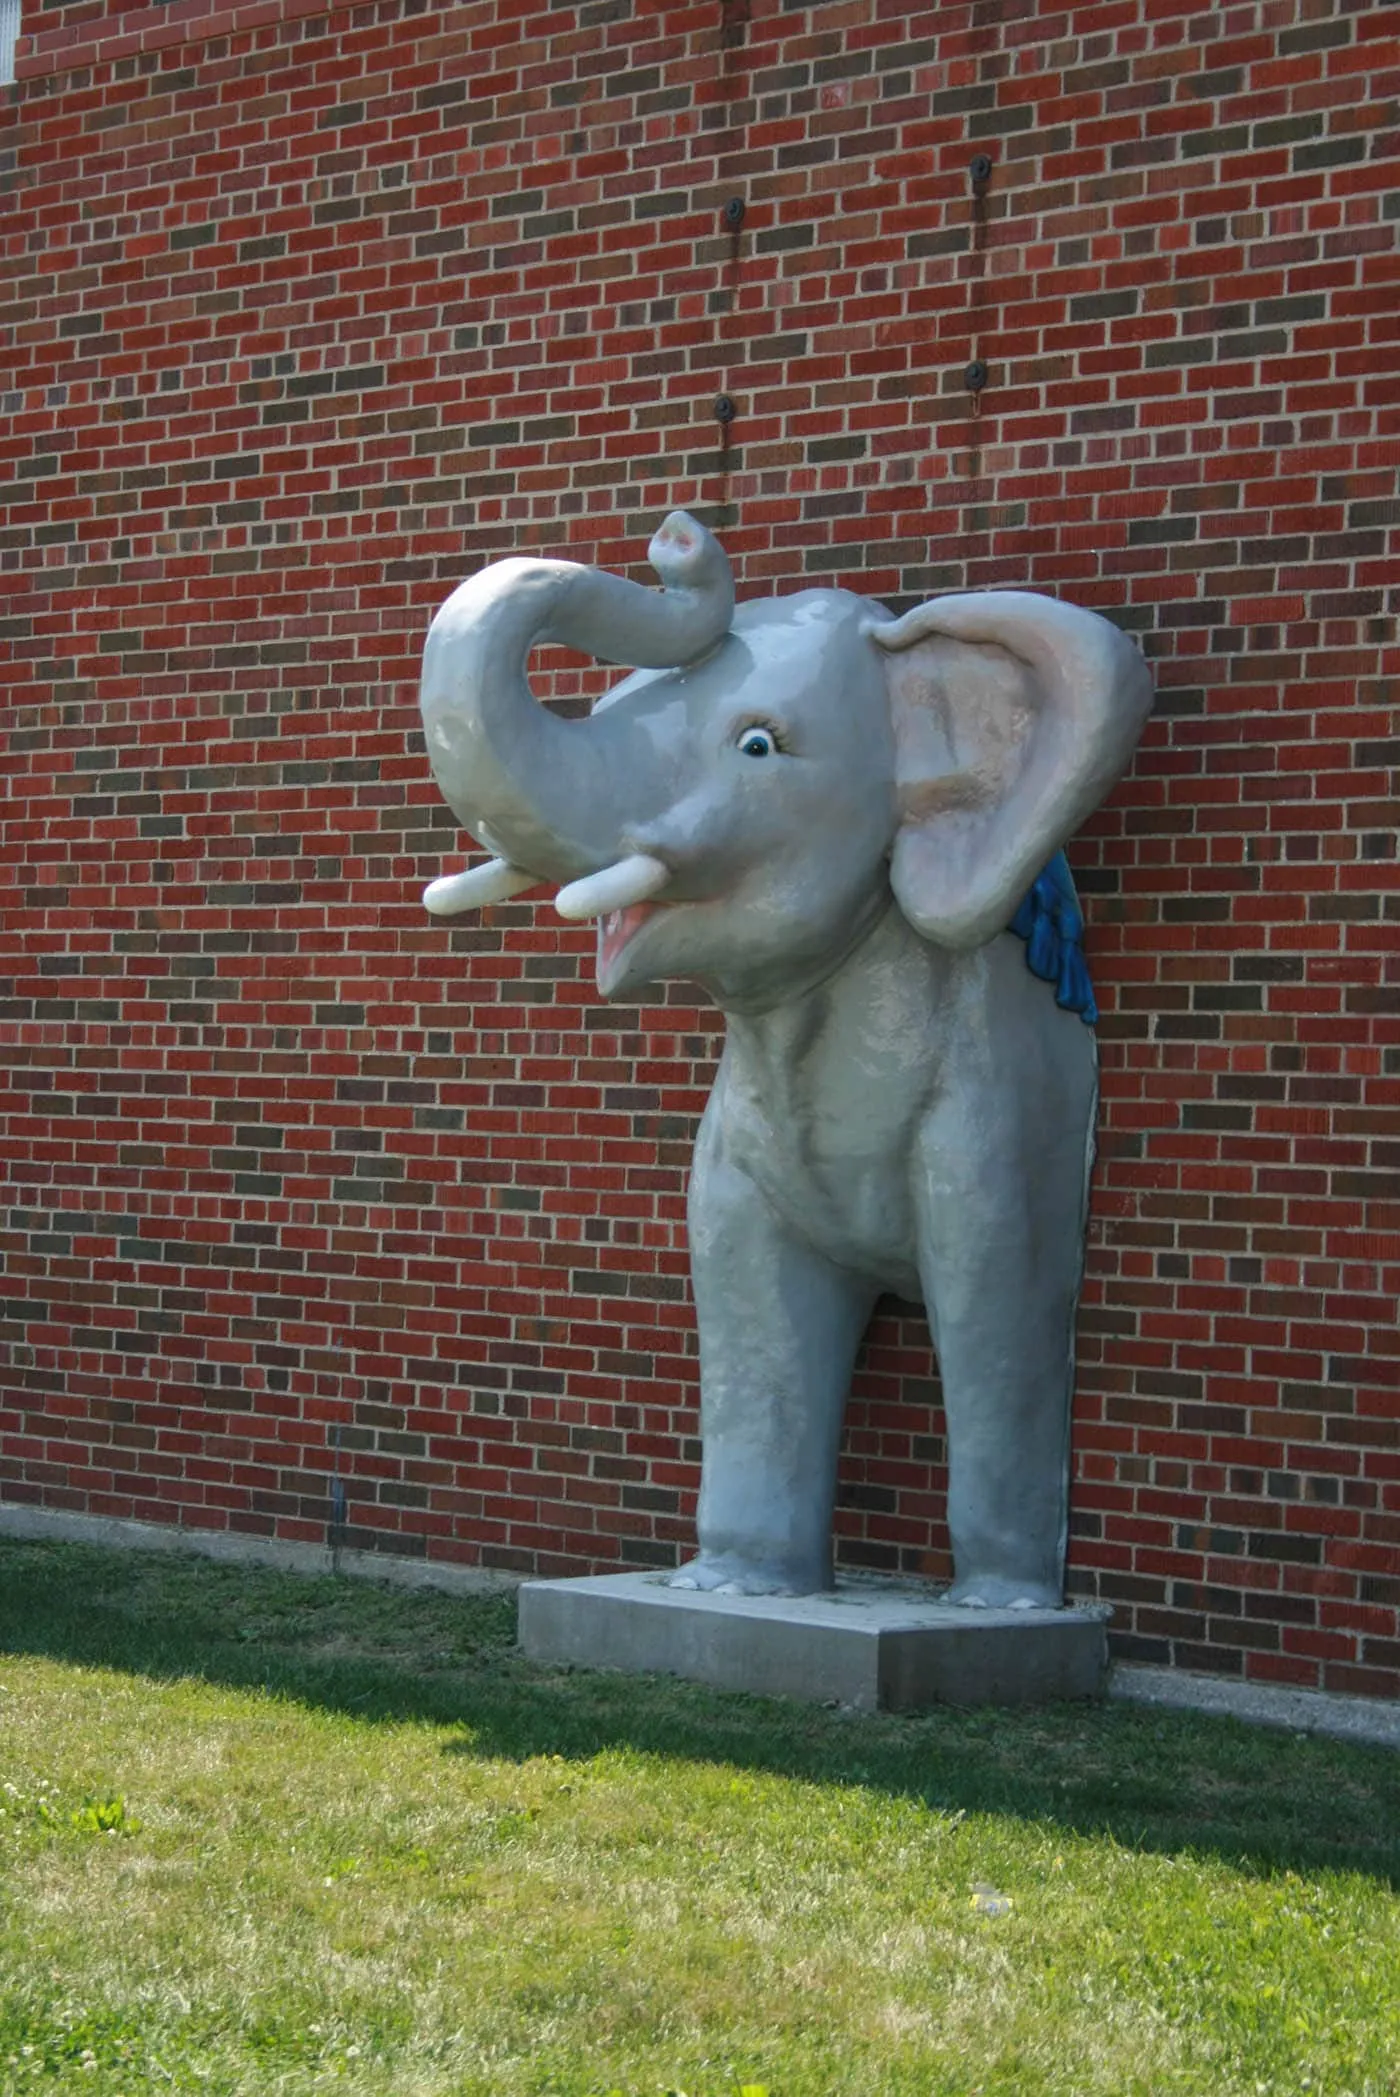 Fiberglass Elephant - a roadside attraction at Pink Elephant Antique Mall in Livingston, Illinois